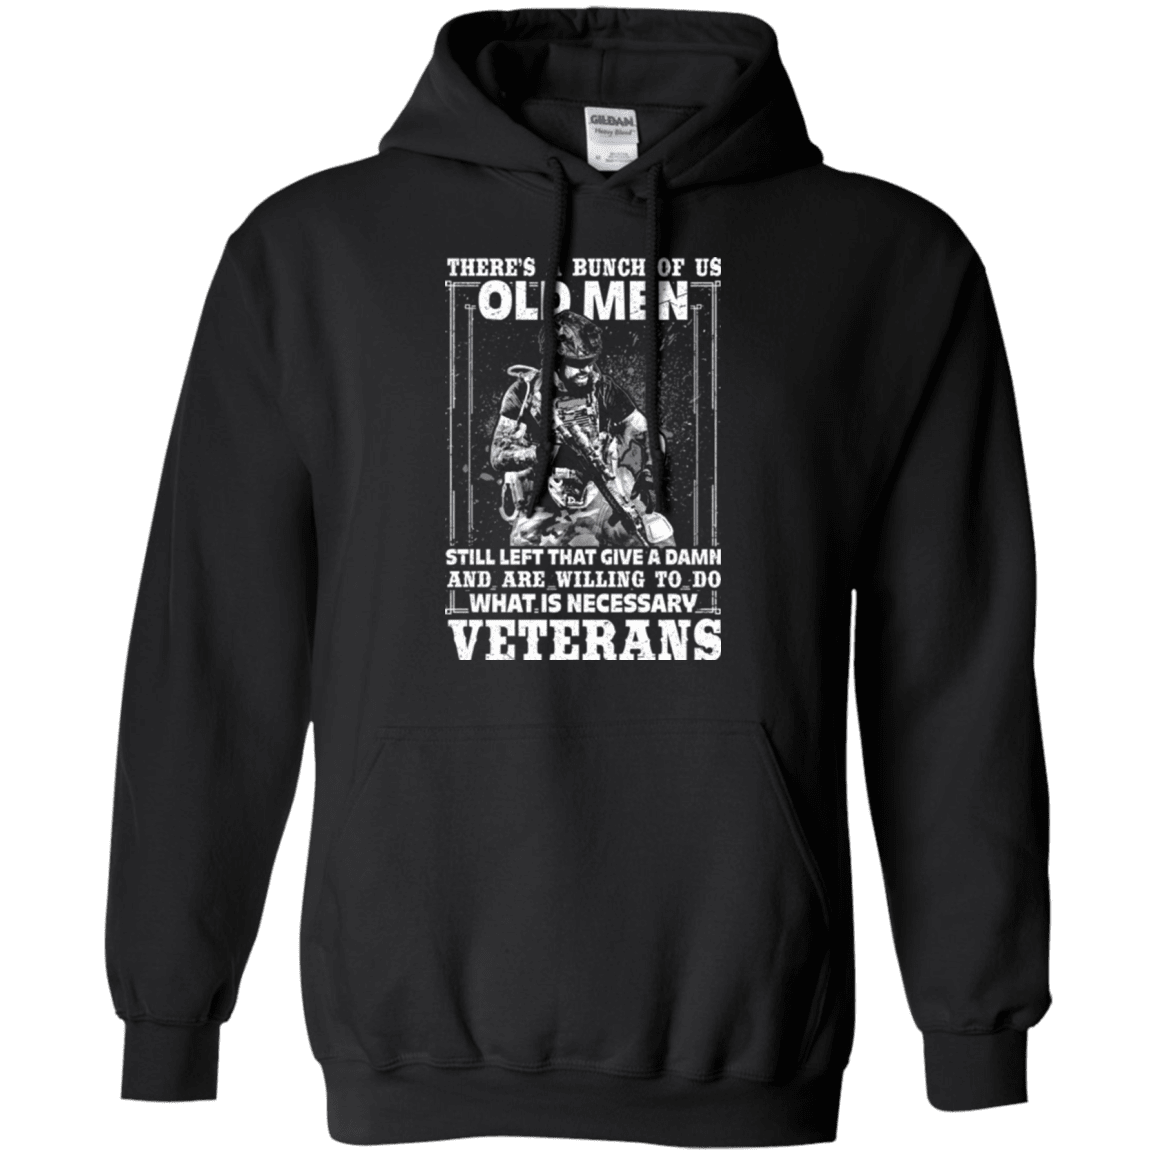 Military T-Shirt "OLD VETERAN ARE WILLING TO DO"-TShirt-General-Veterans Nation